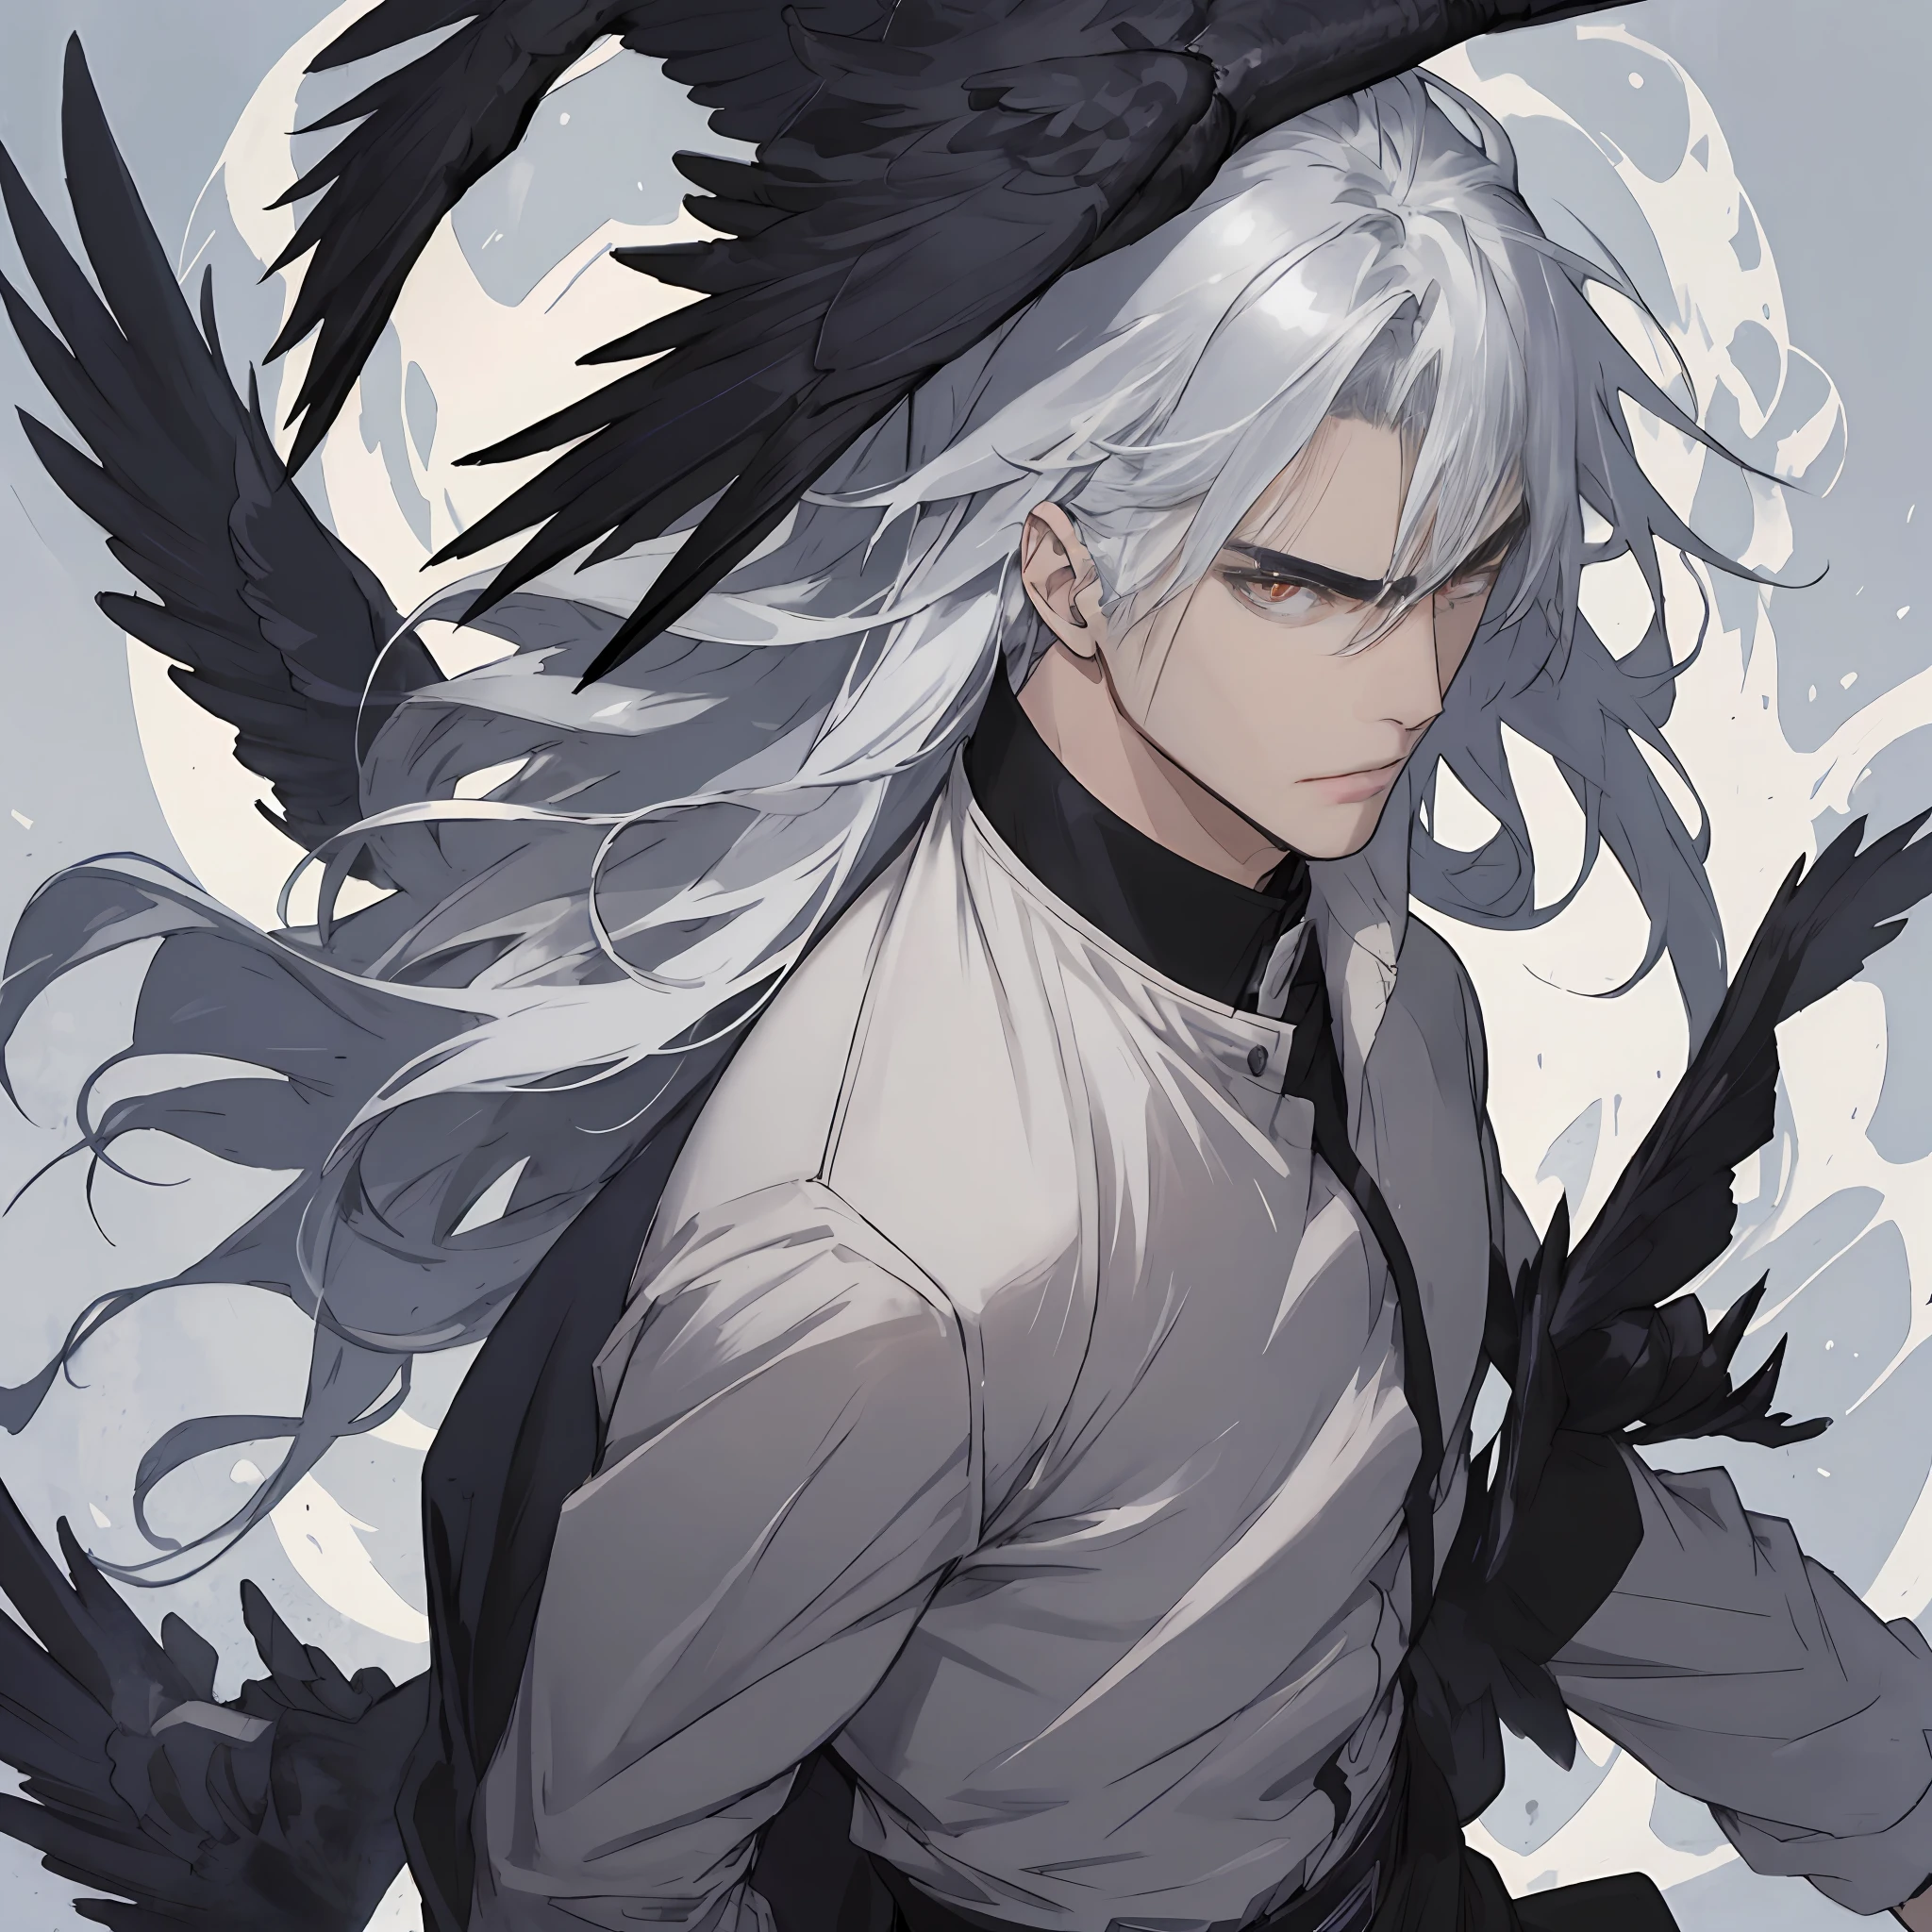 anime big breast， Comic texture，Pubic area is clear，male people，Silver hair flowing，Handsome，Powerful，Black Crow，Arrogant eyes